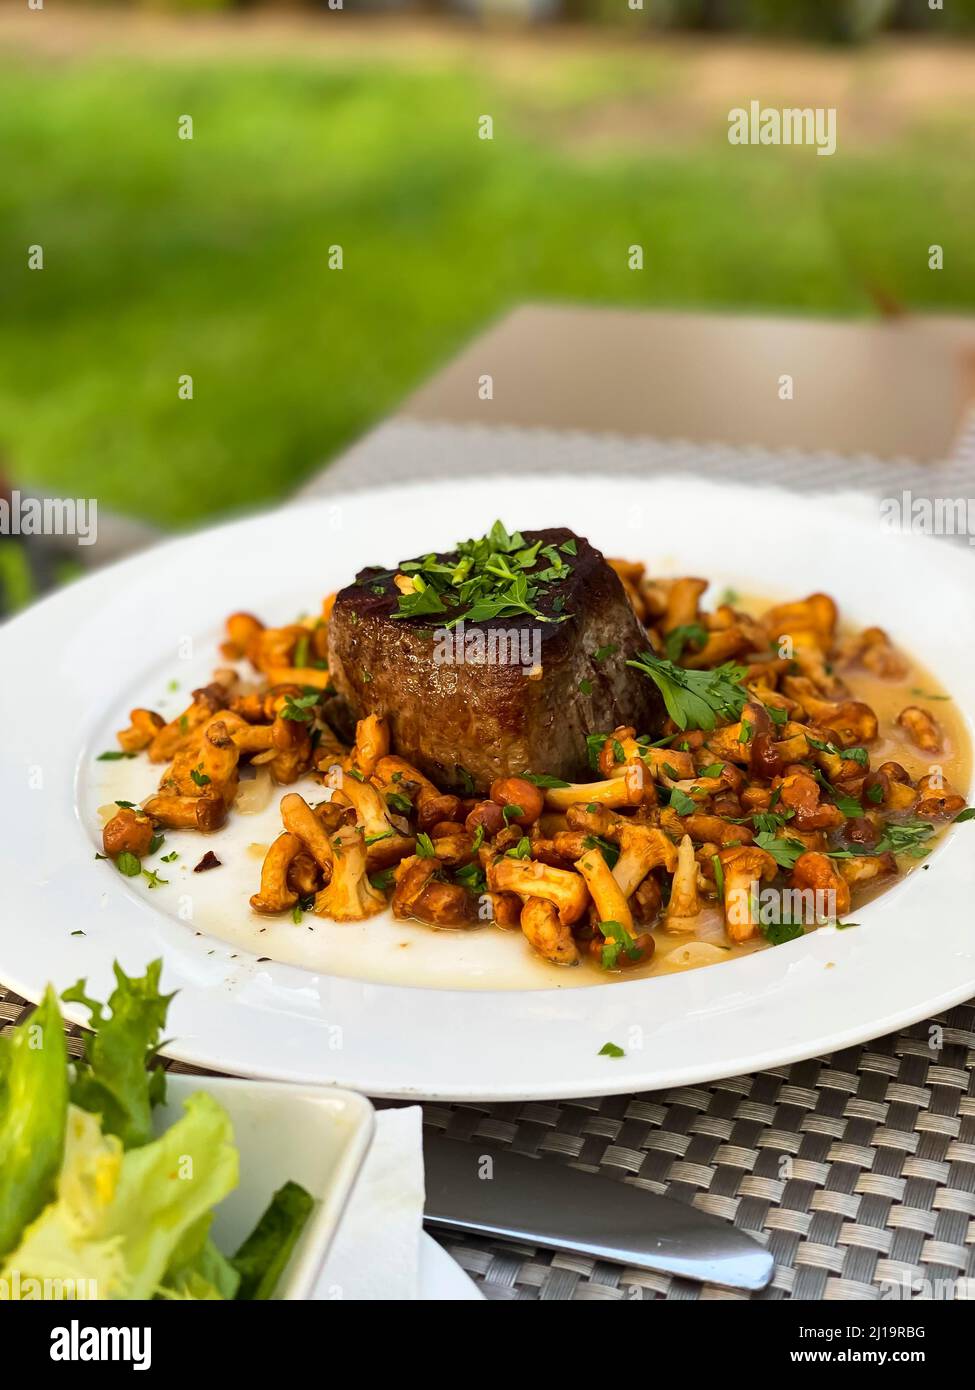 Fillet steak with chanterelles and parsley Stock Photo